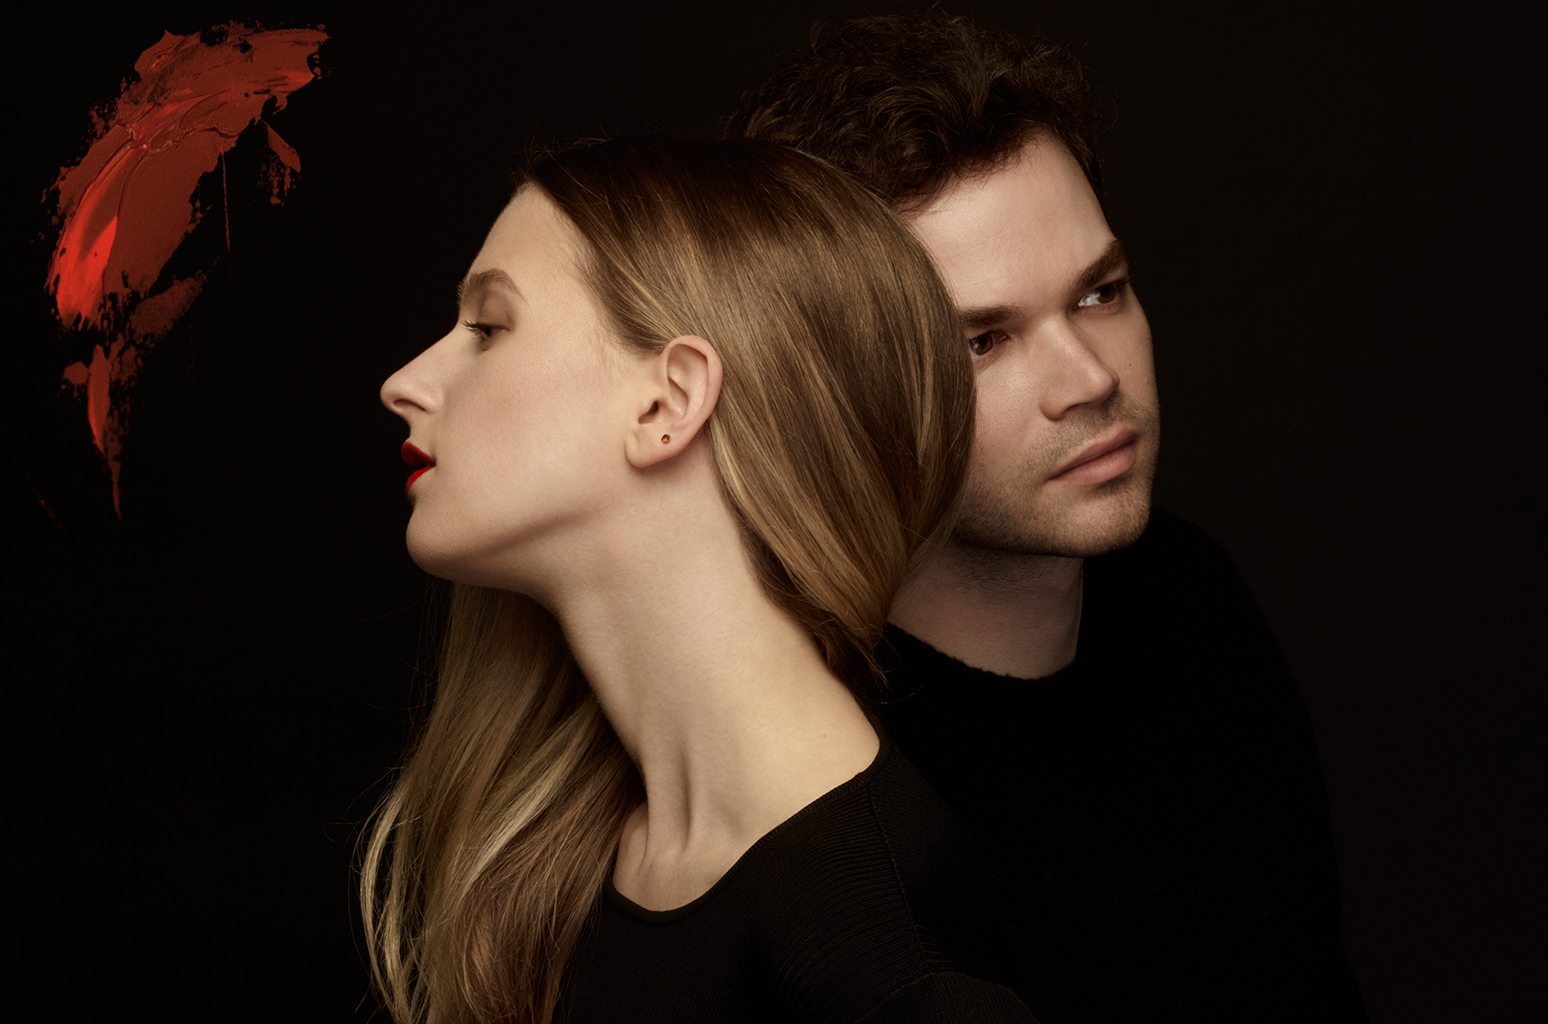 down by marian hill from the album